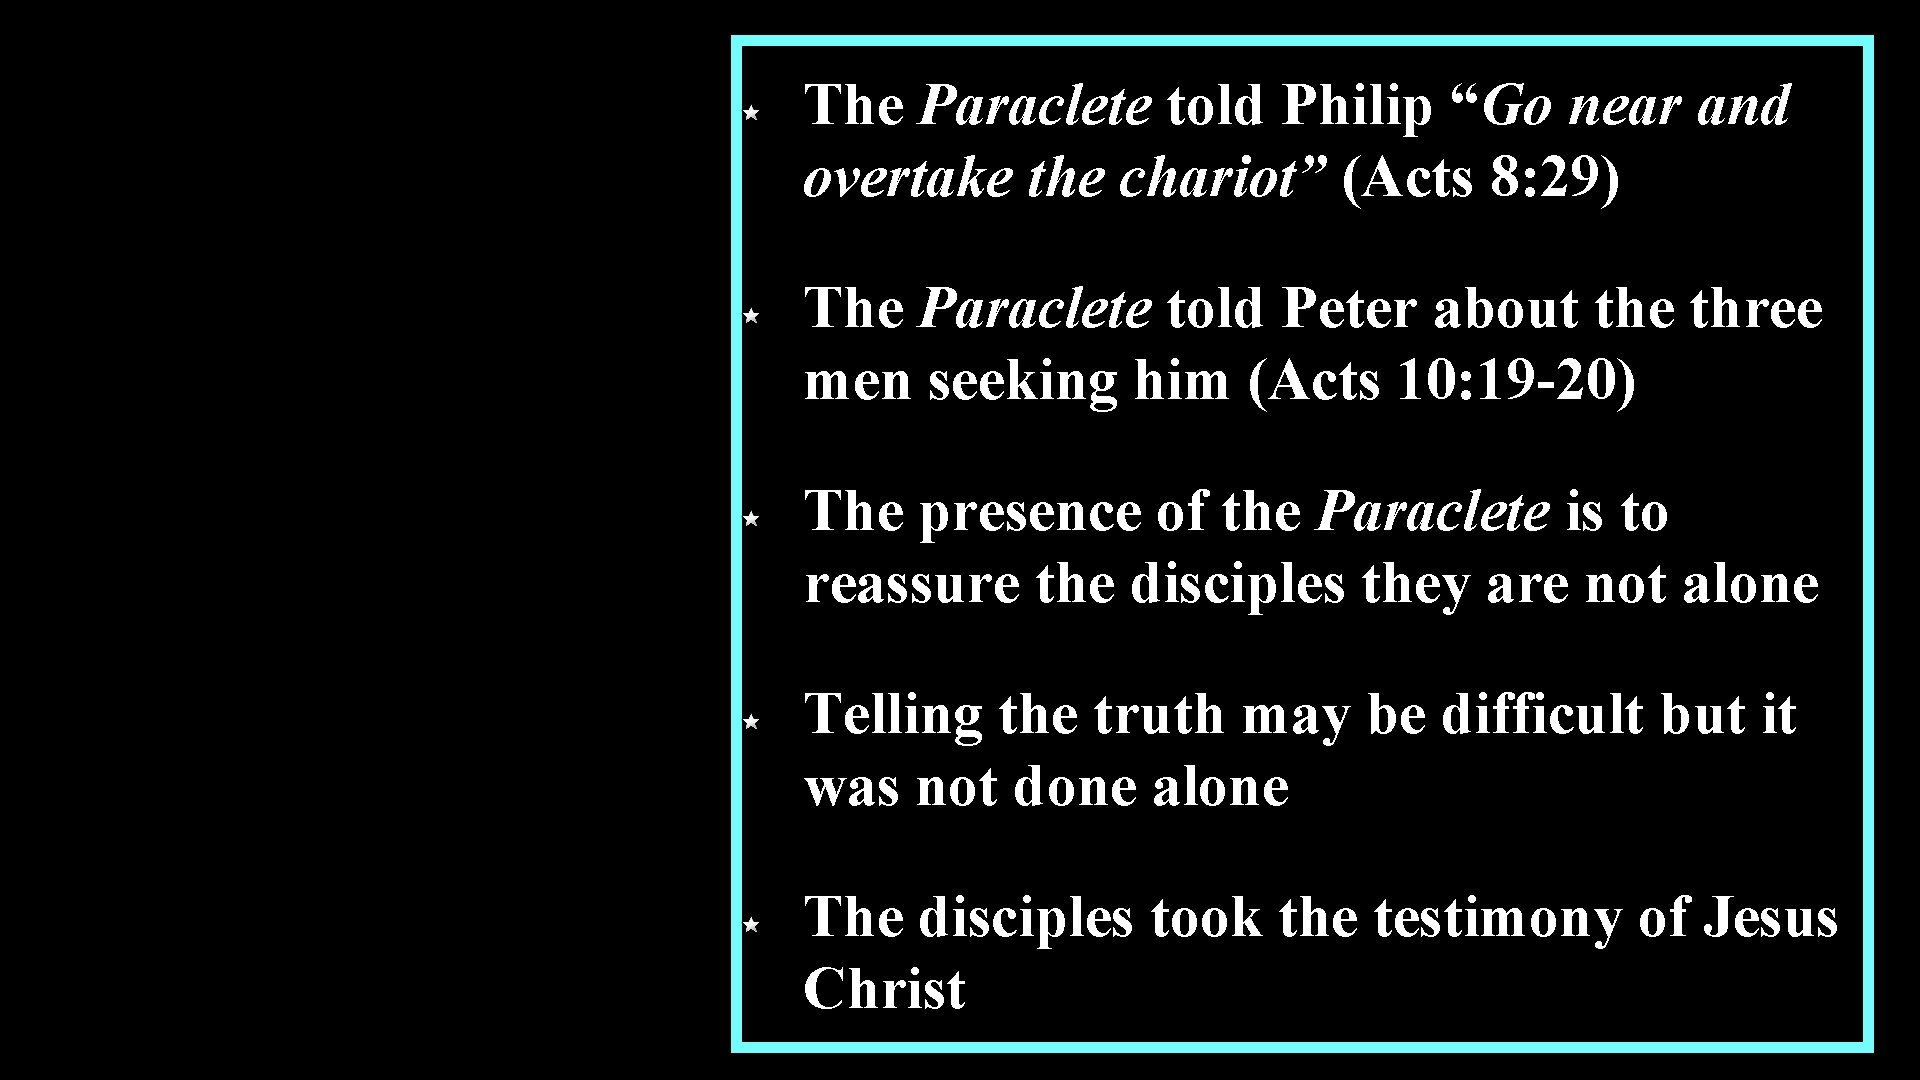 The Paraclete told Philip “Go near and overtake the chariot” (Acts 8: 29) The